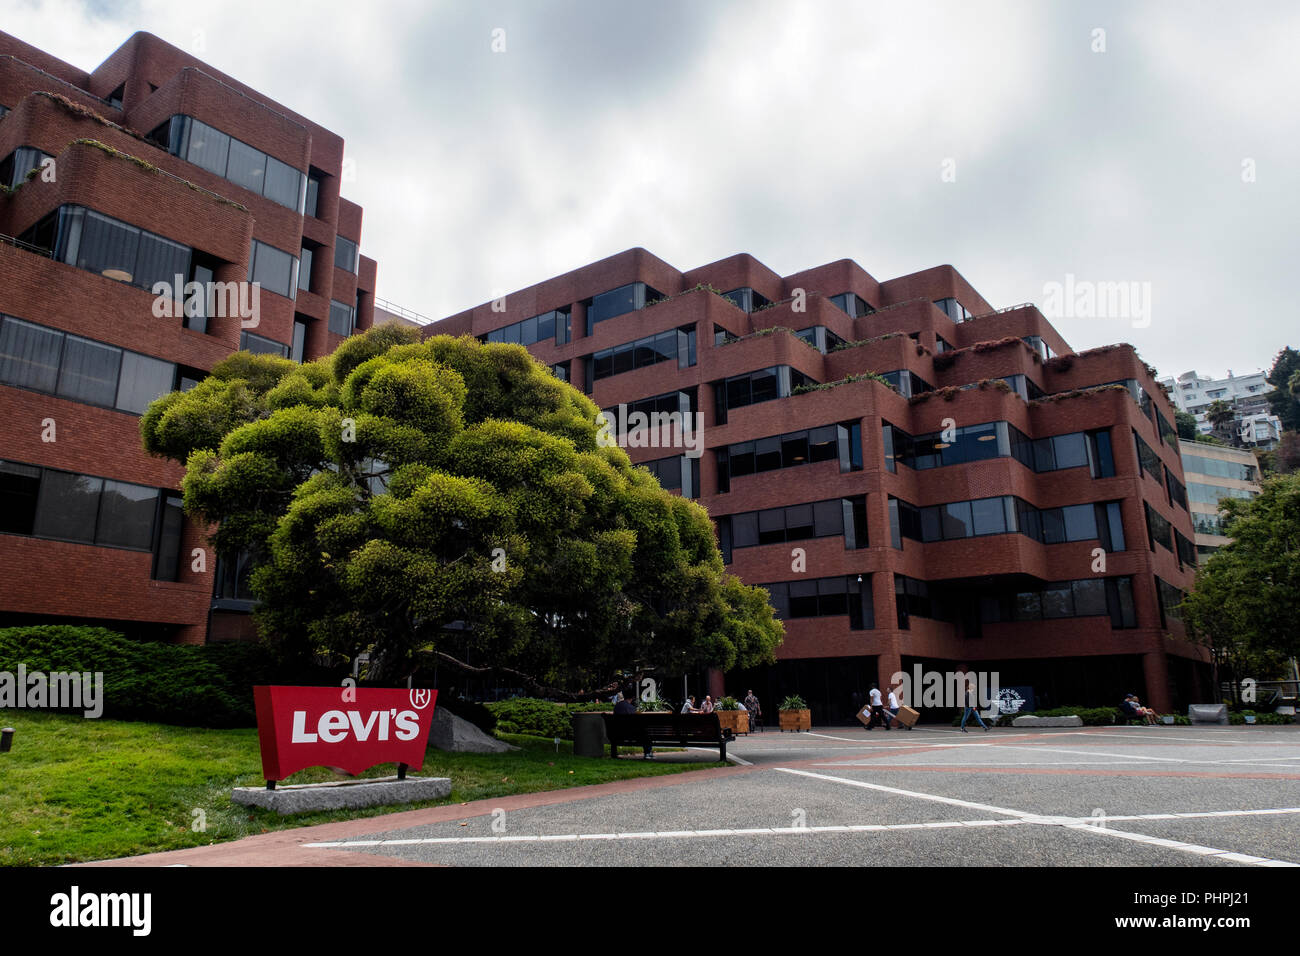 levi strauss and co headquarters